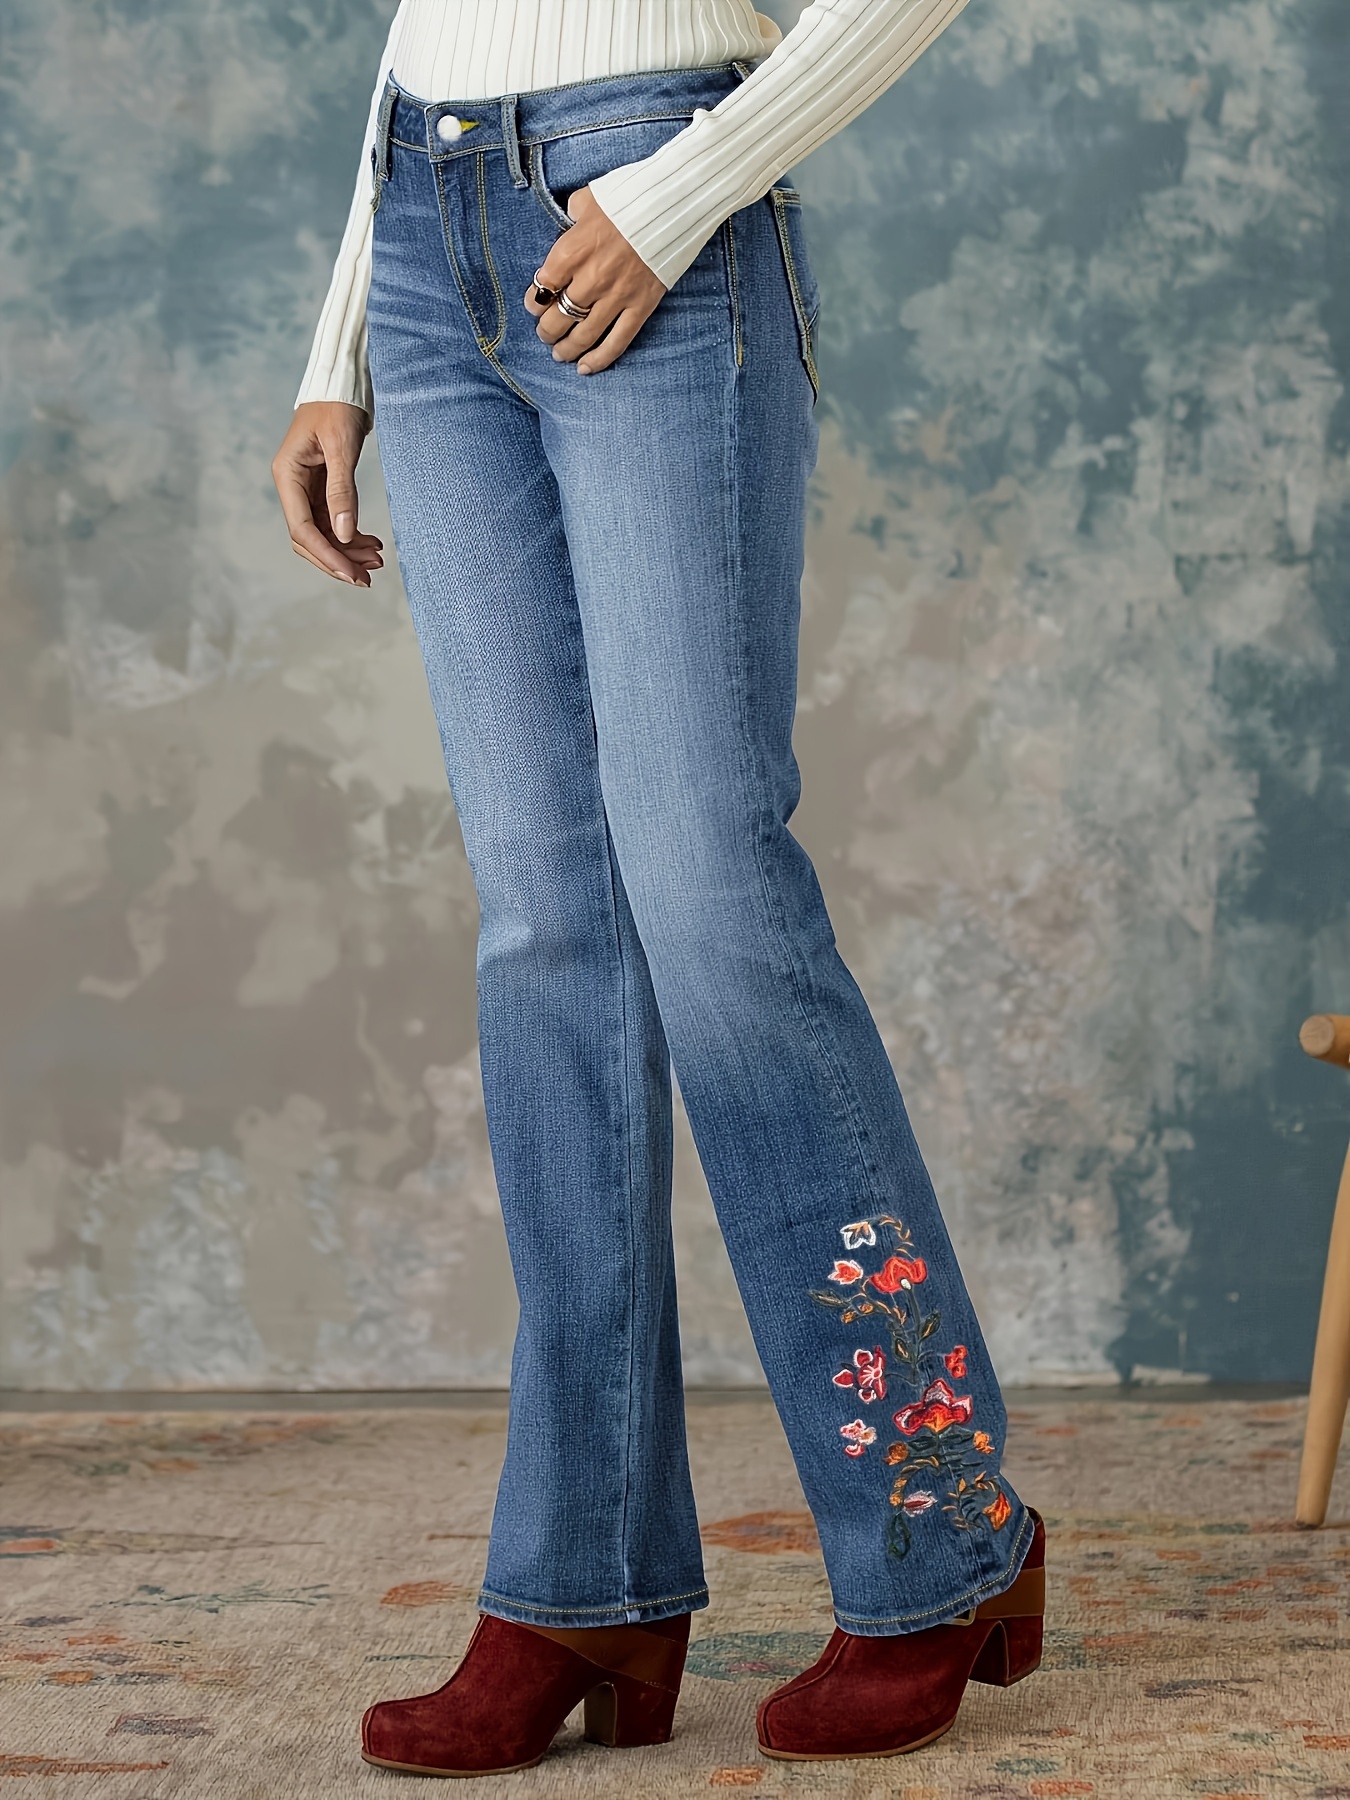 Floral Embroidered Niche Flare Jeans, Slant Pockets High Stretch Bell  Bottom Jeans, Women's Denim Jeans & Clothing